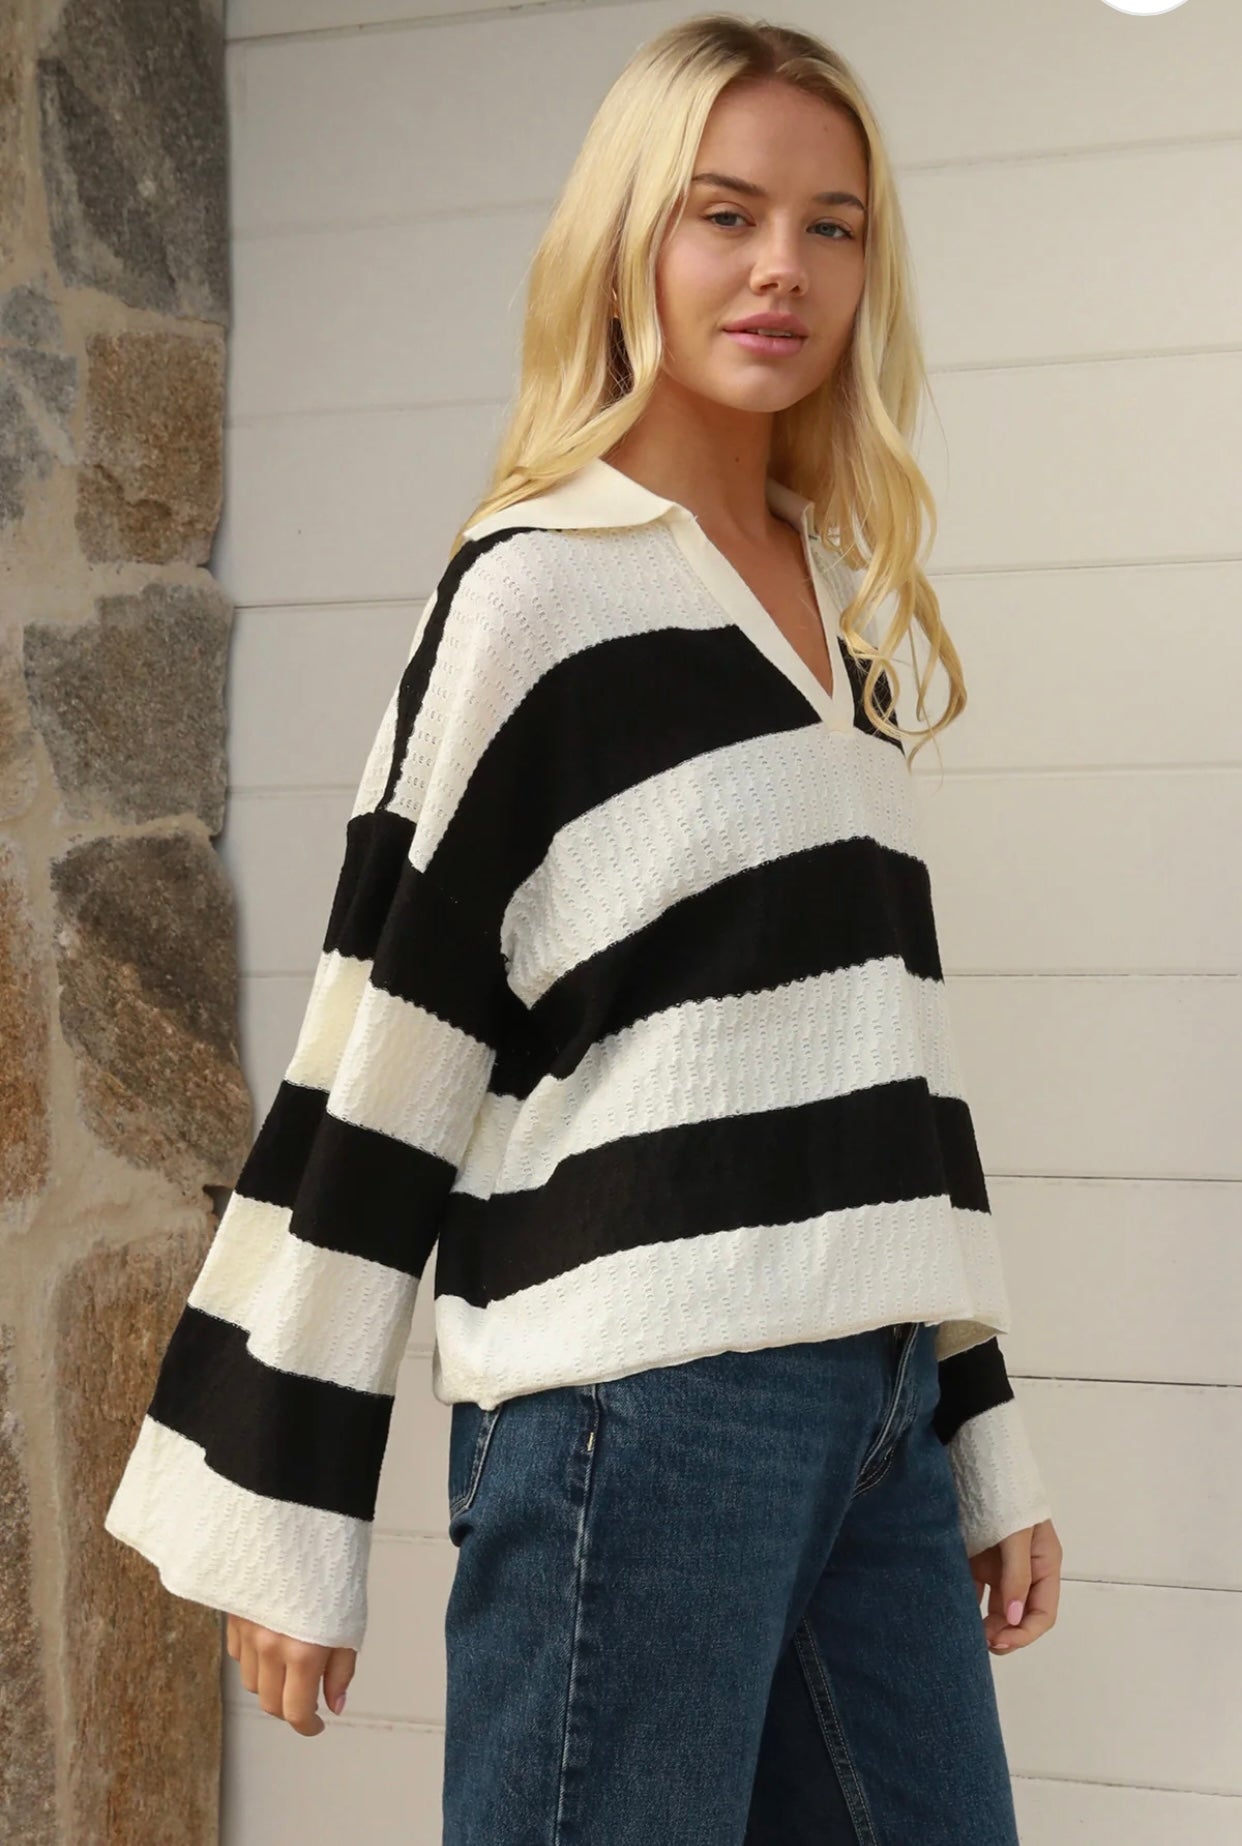 Labelle Pullover Waffle Weave Knit Top